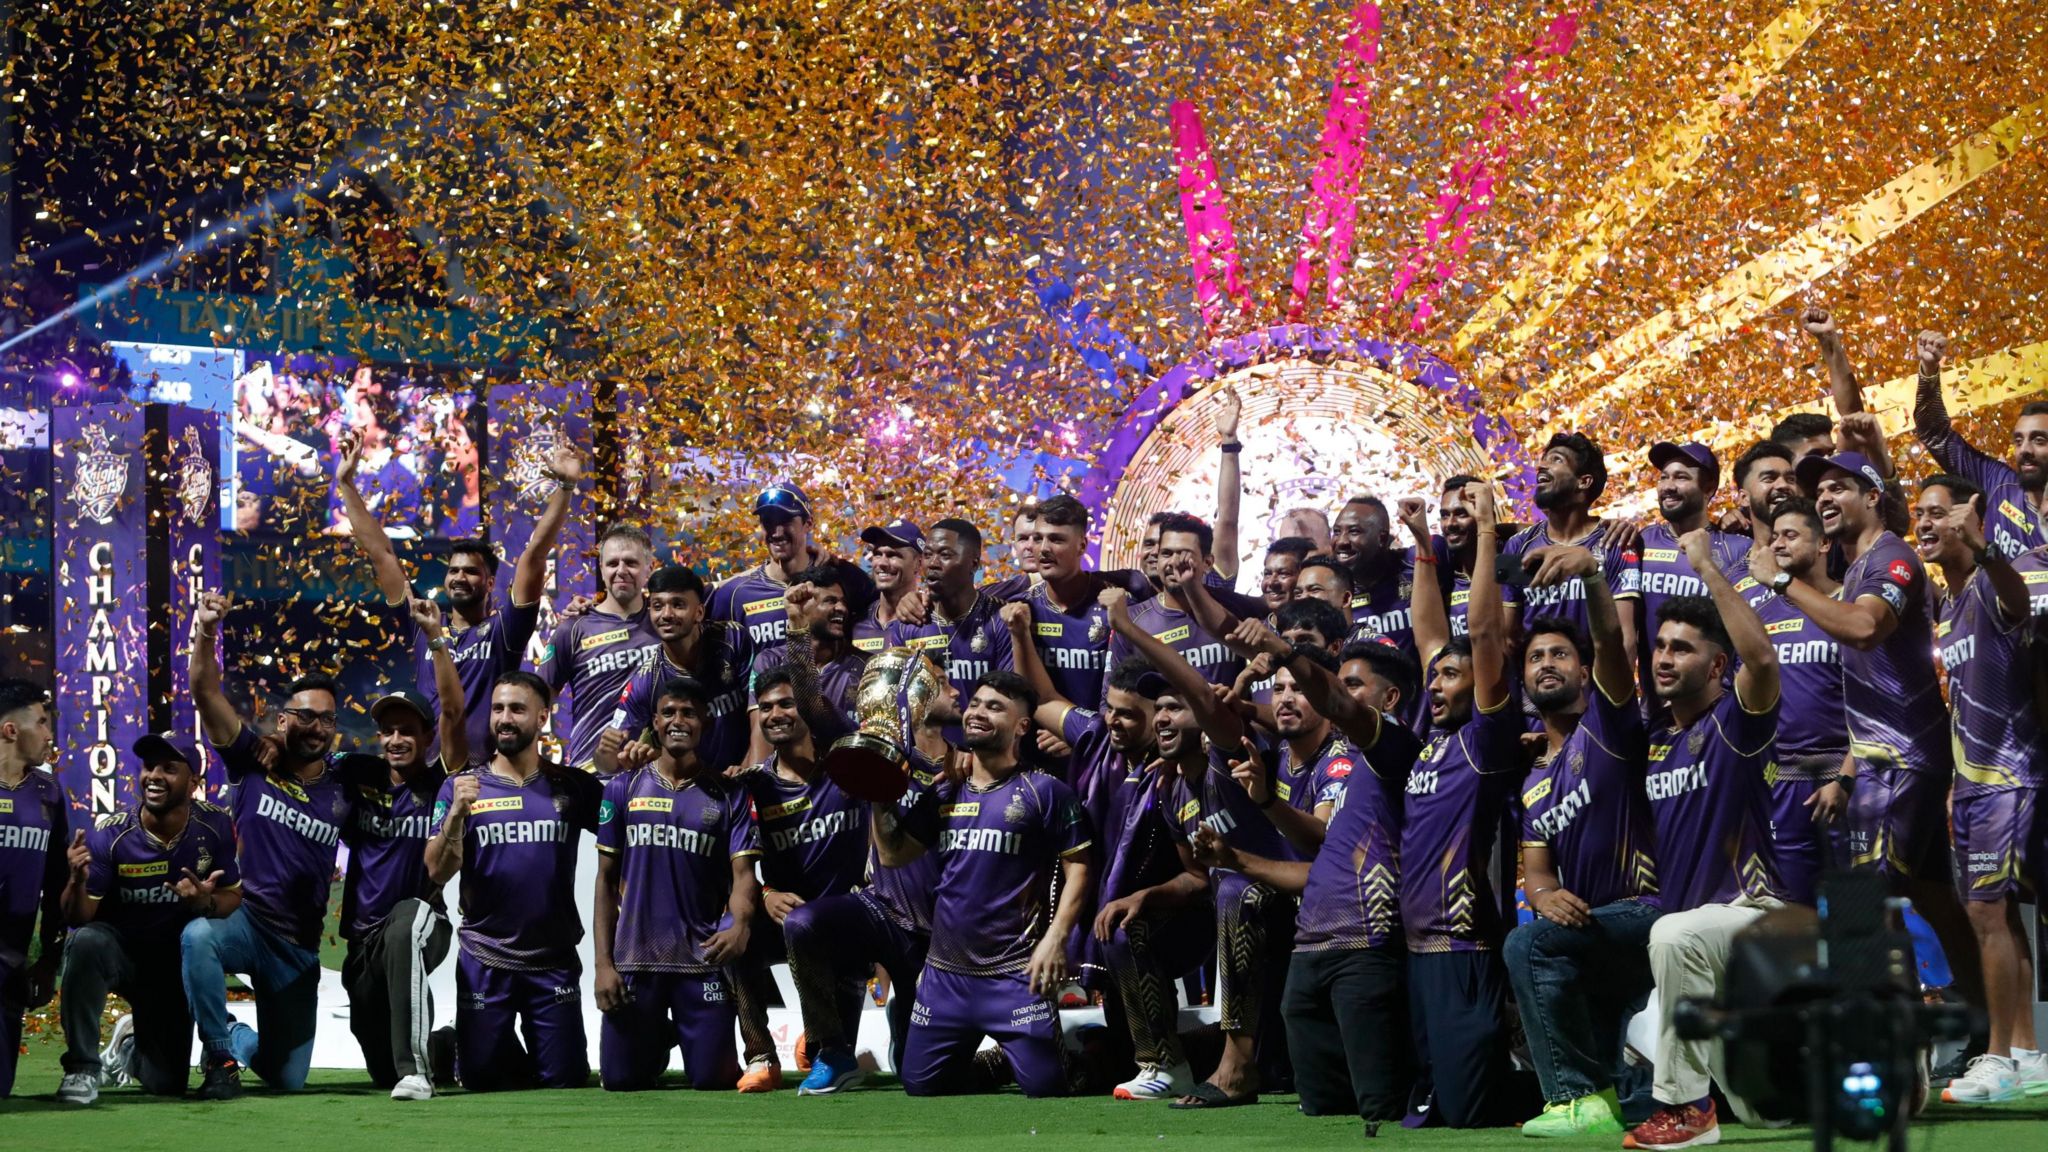 Kolkata Knight Riders Claiming back the title of IPL winner after 10 years